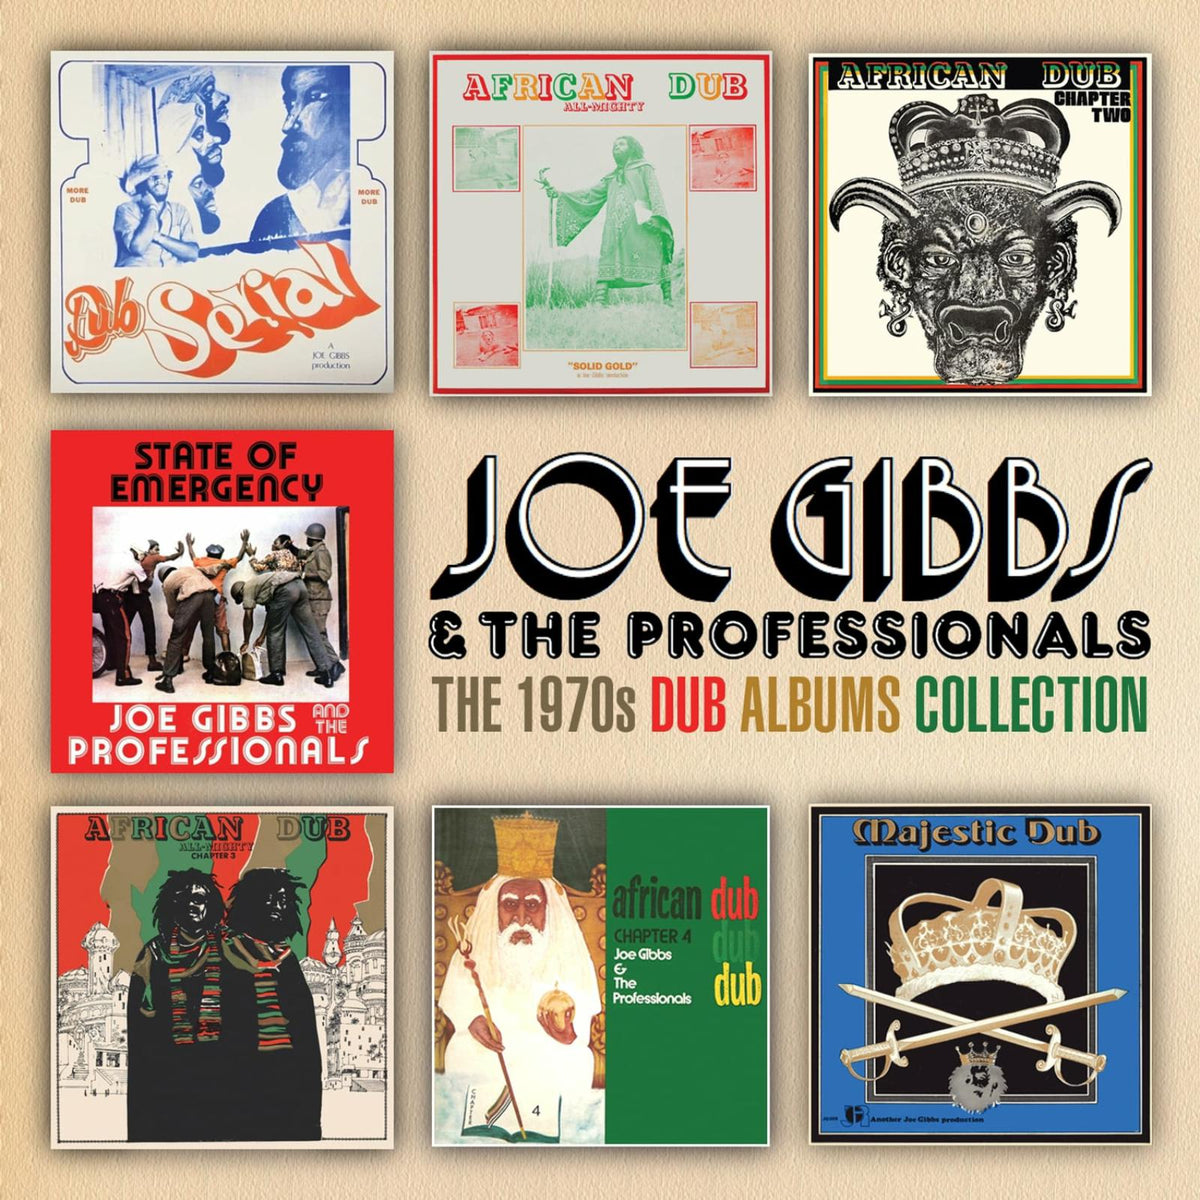 The 1970s Dub Albums Collection - 4cd Box Set